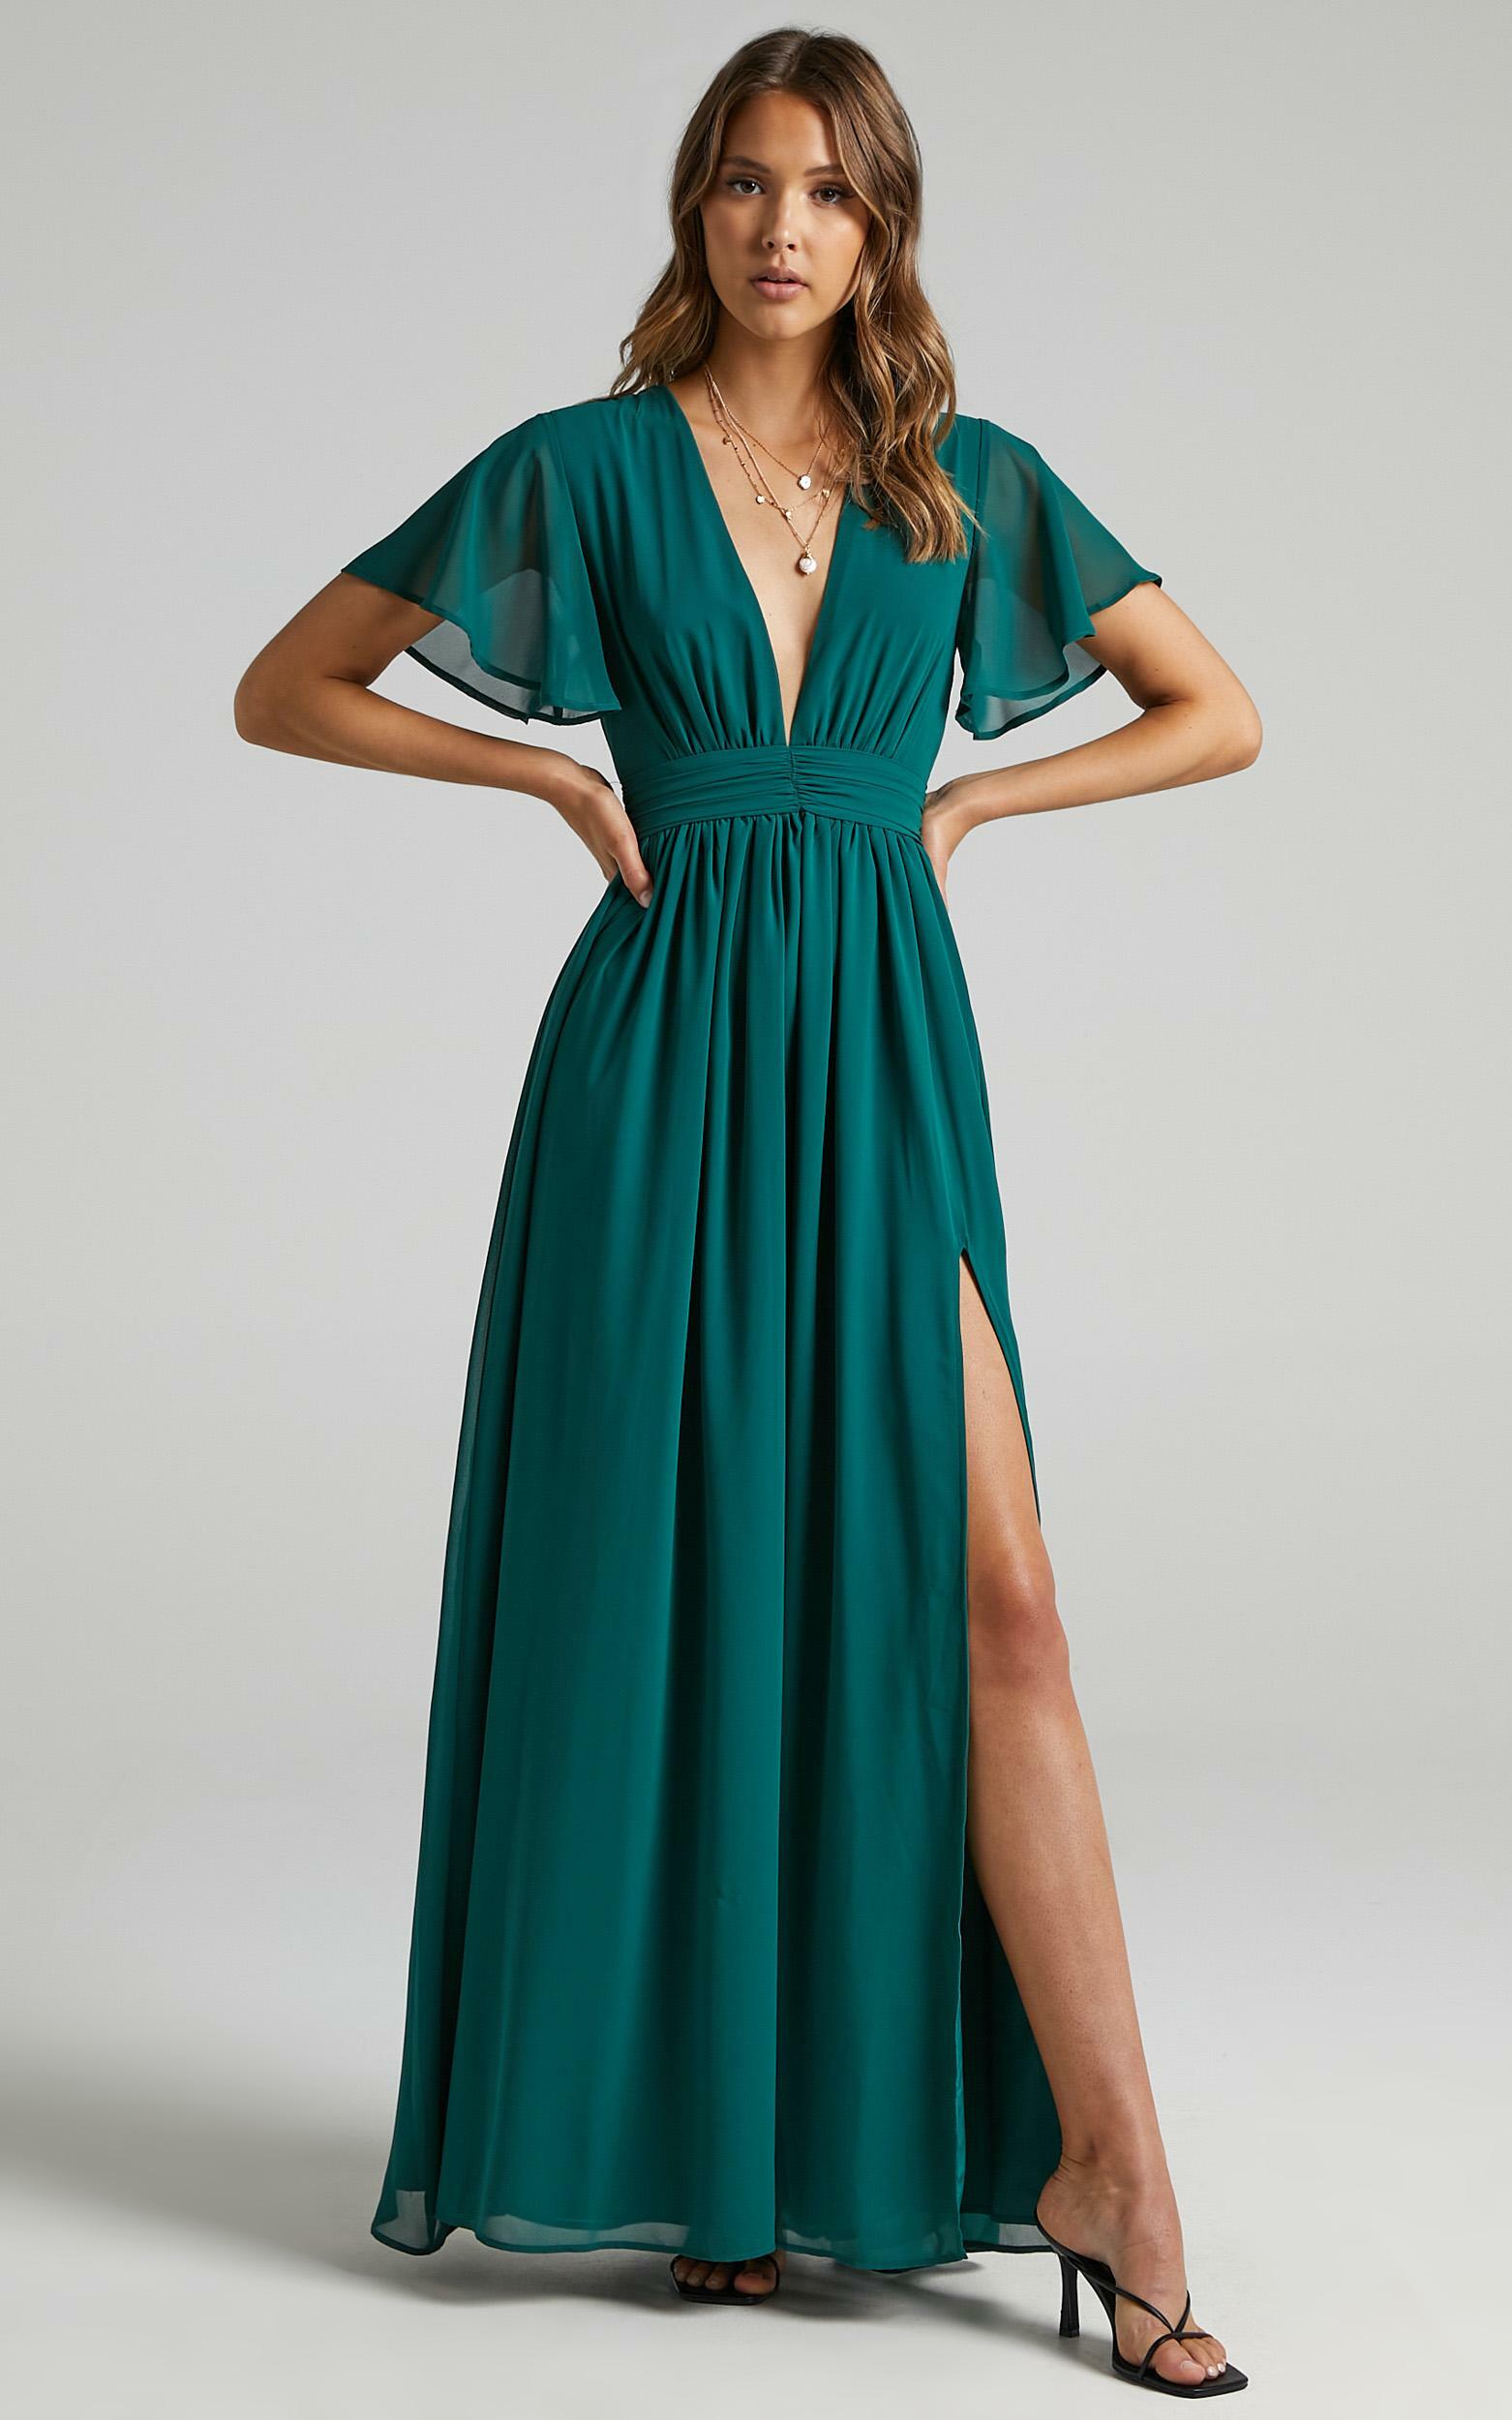 December Empire Waist Maxi Dress in Emerald - 06, GRN1, hi-res image number null